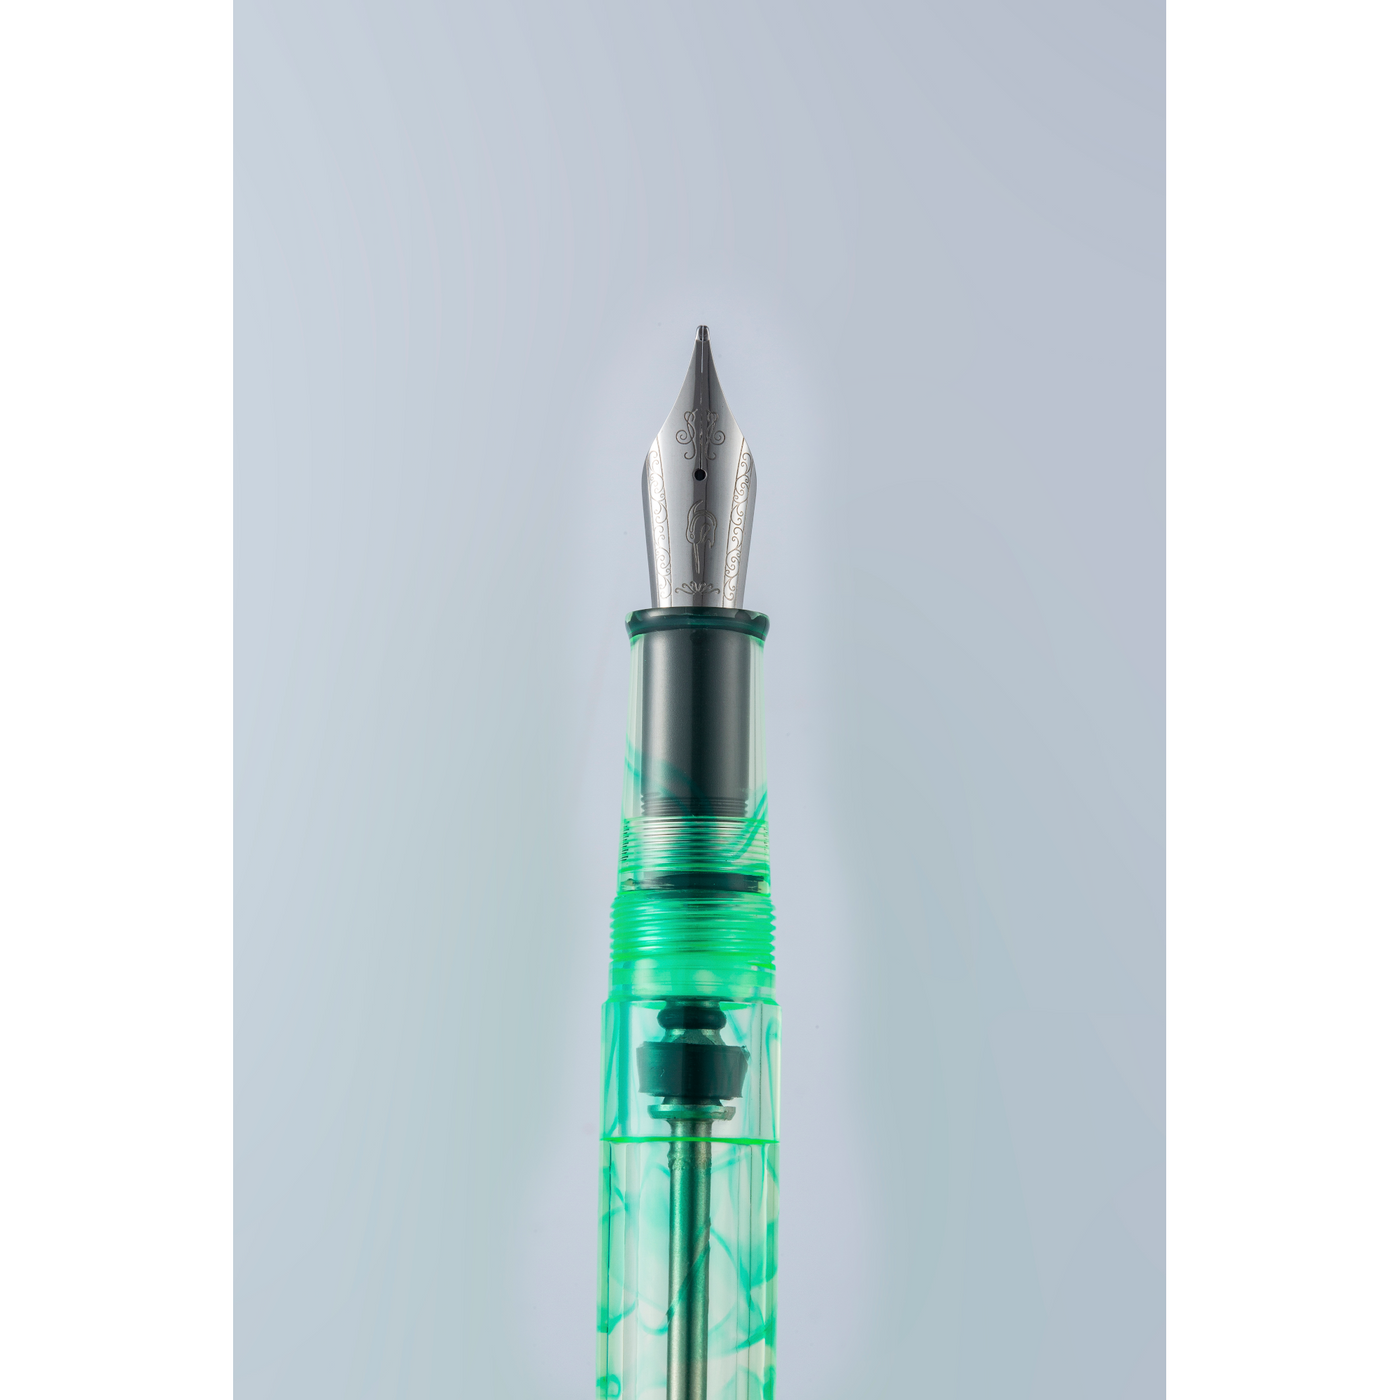 Nahvalur (Narwhal) Original Plus Fountain Pen - Altifrons Green | Atlas Stationers.